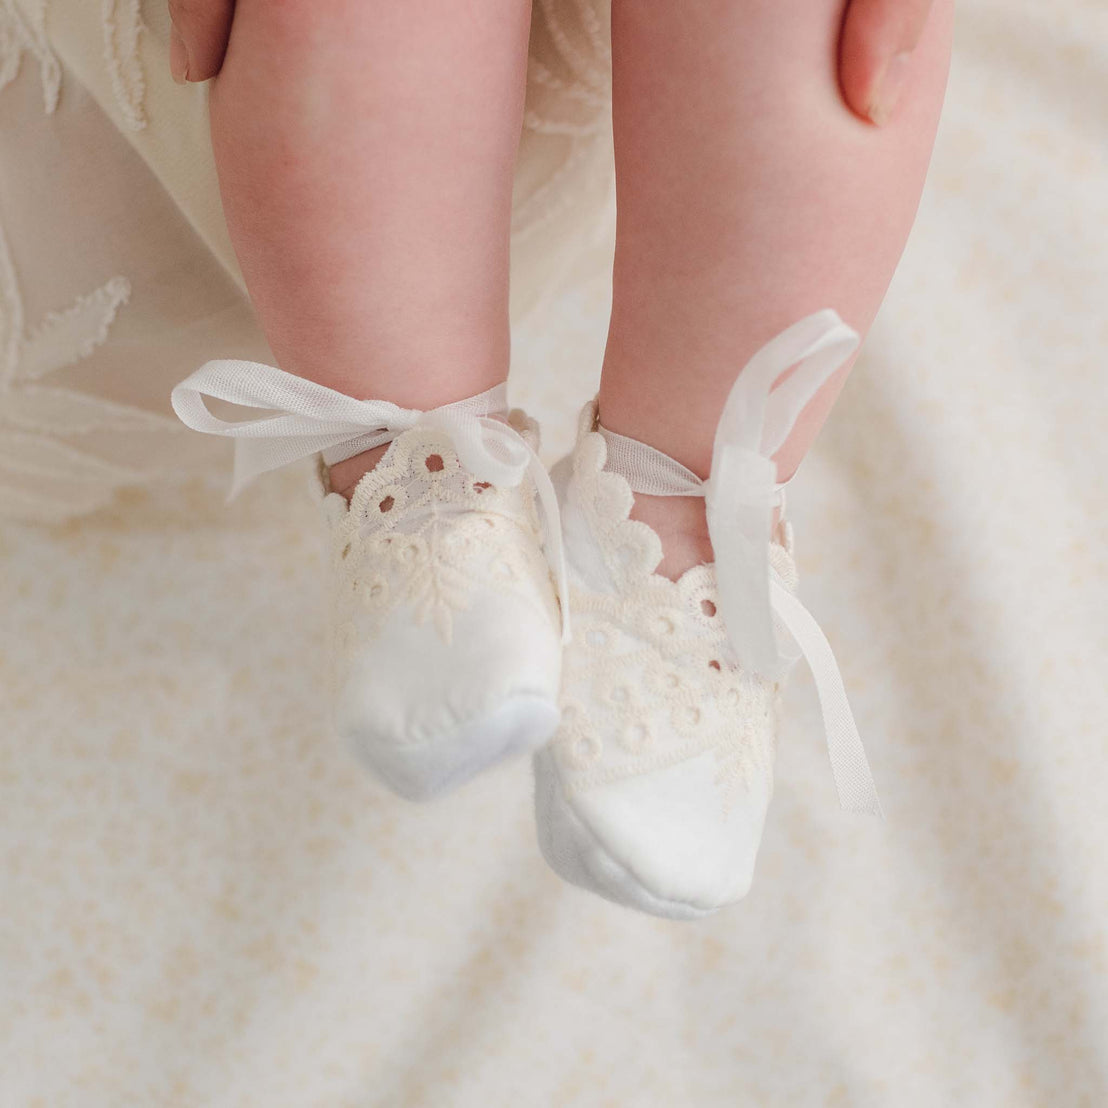 Close-up of a baby's feet wearing delicate Ingrid Booties with vintage white lace and ribbons. The baby’s legs rest against a soft, light-colored fabric adorned with subtle floral embroidery. The booties feature intricate lace detailing, complementing the baby's fair skin perfectly.